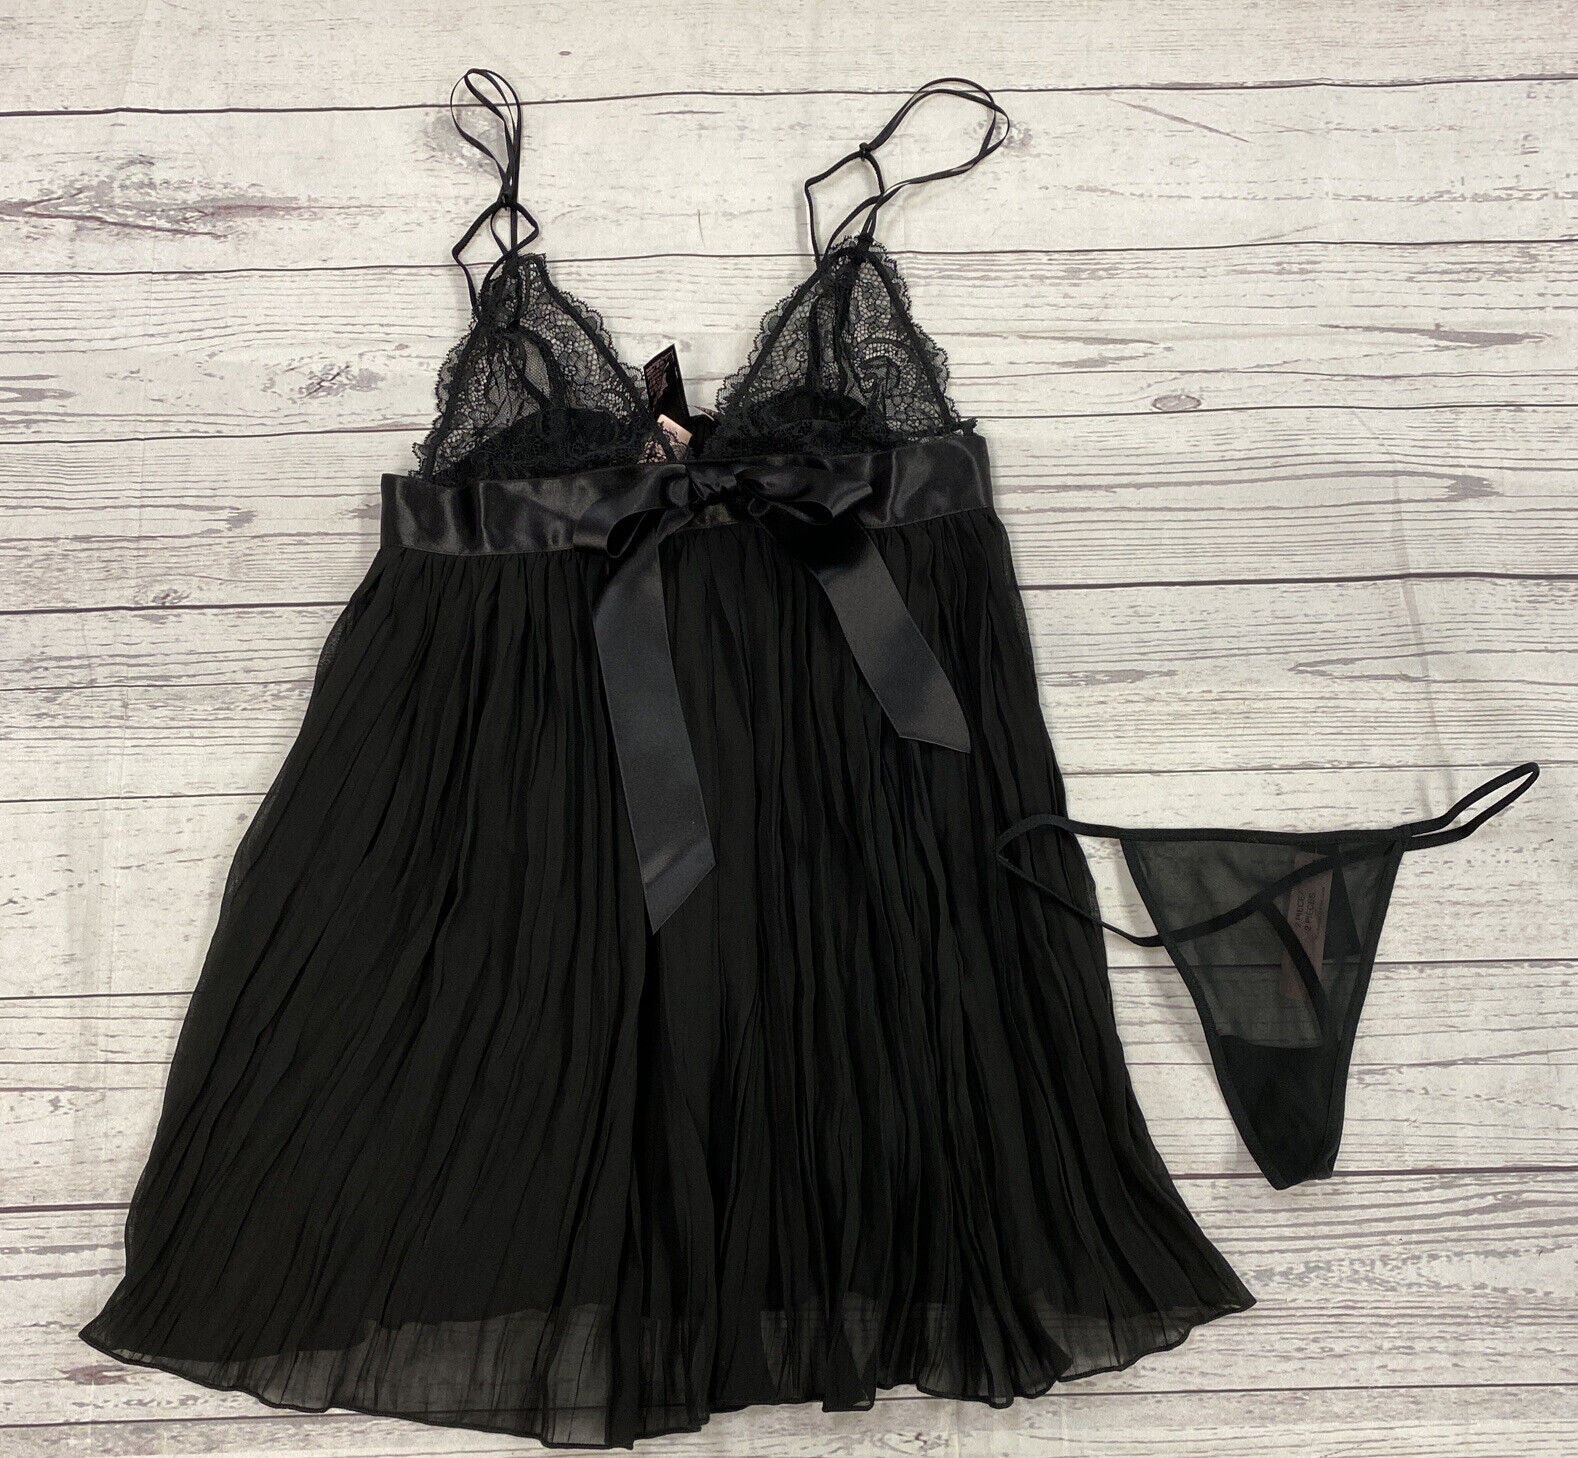  Black Lace Nightgown